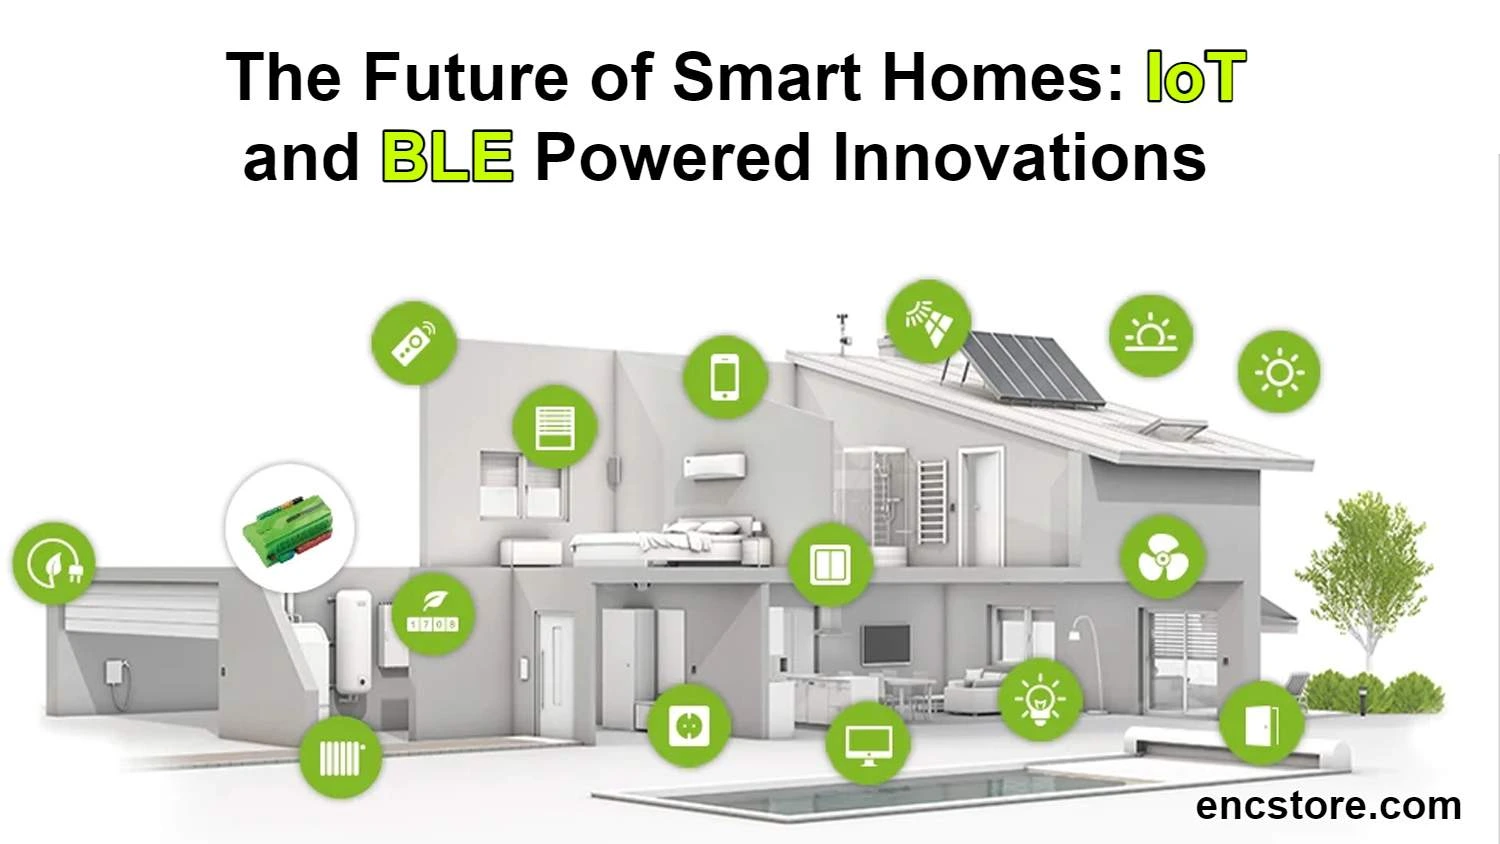 IoT and BLE Powered Innovations